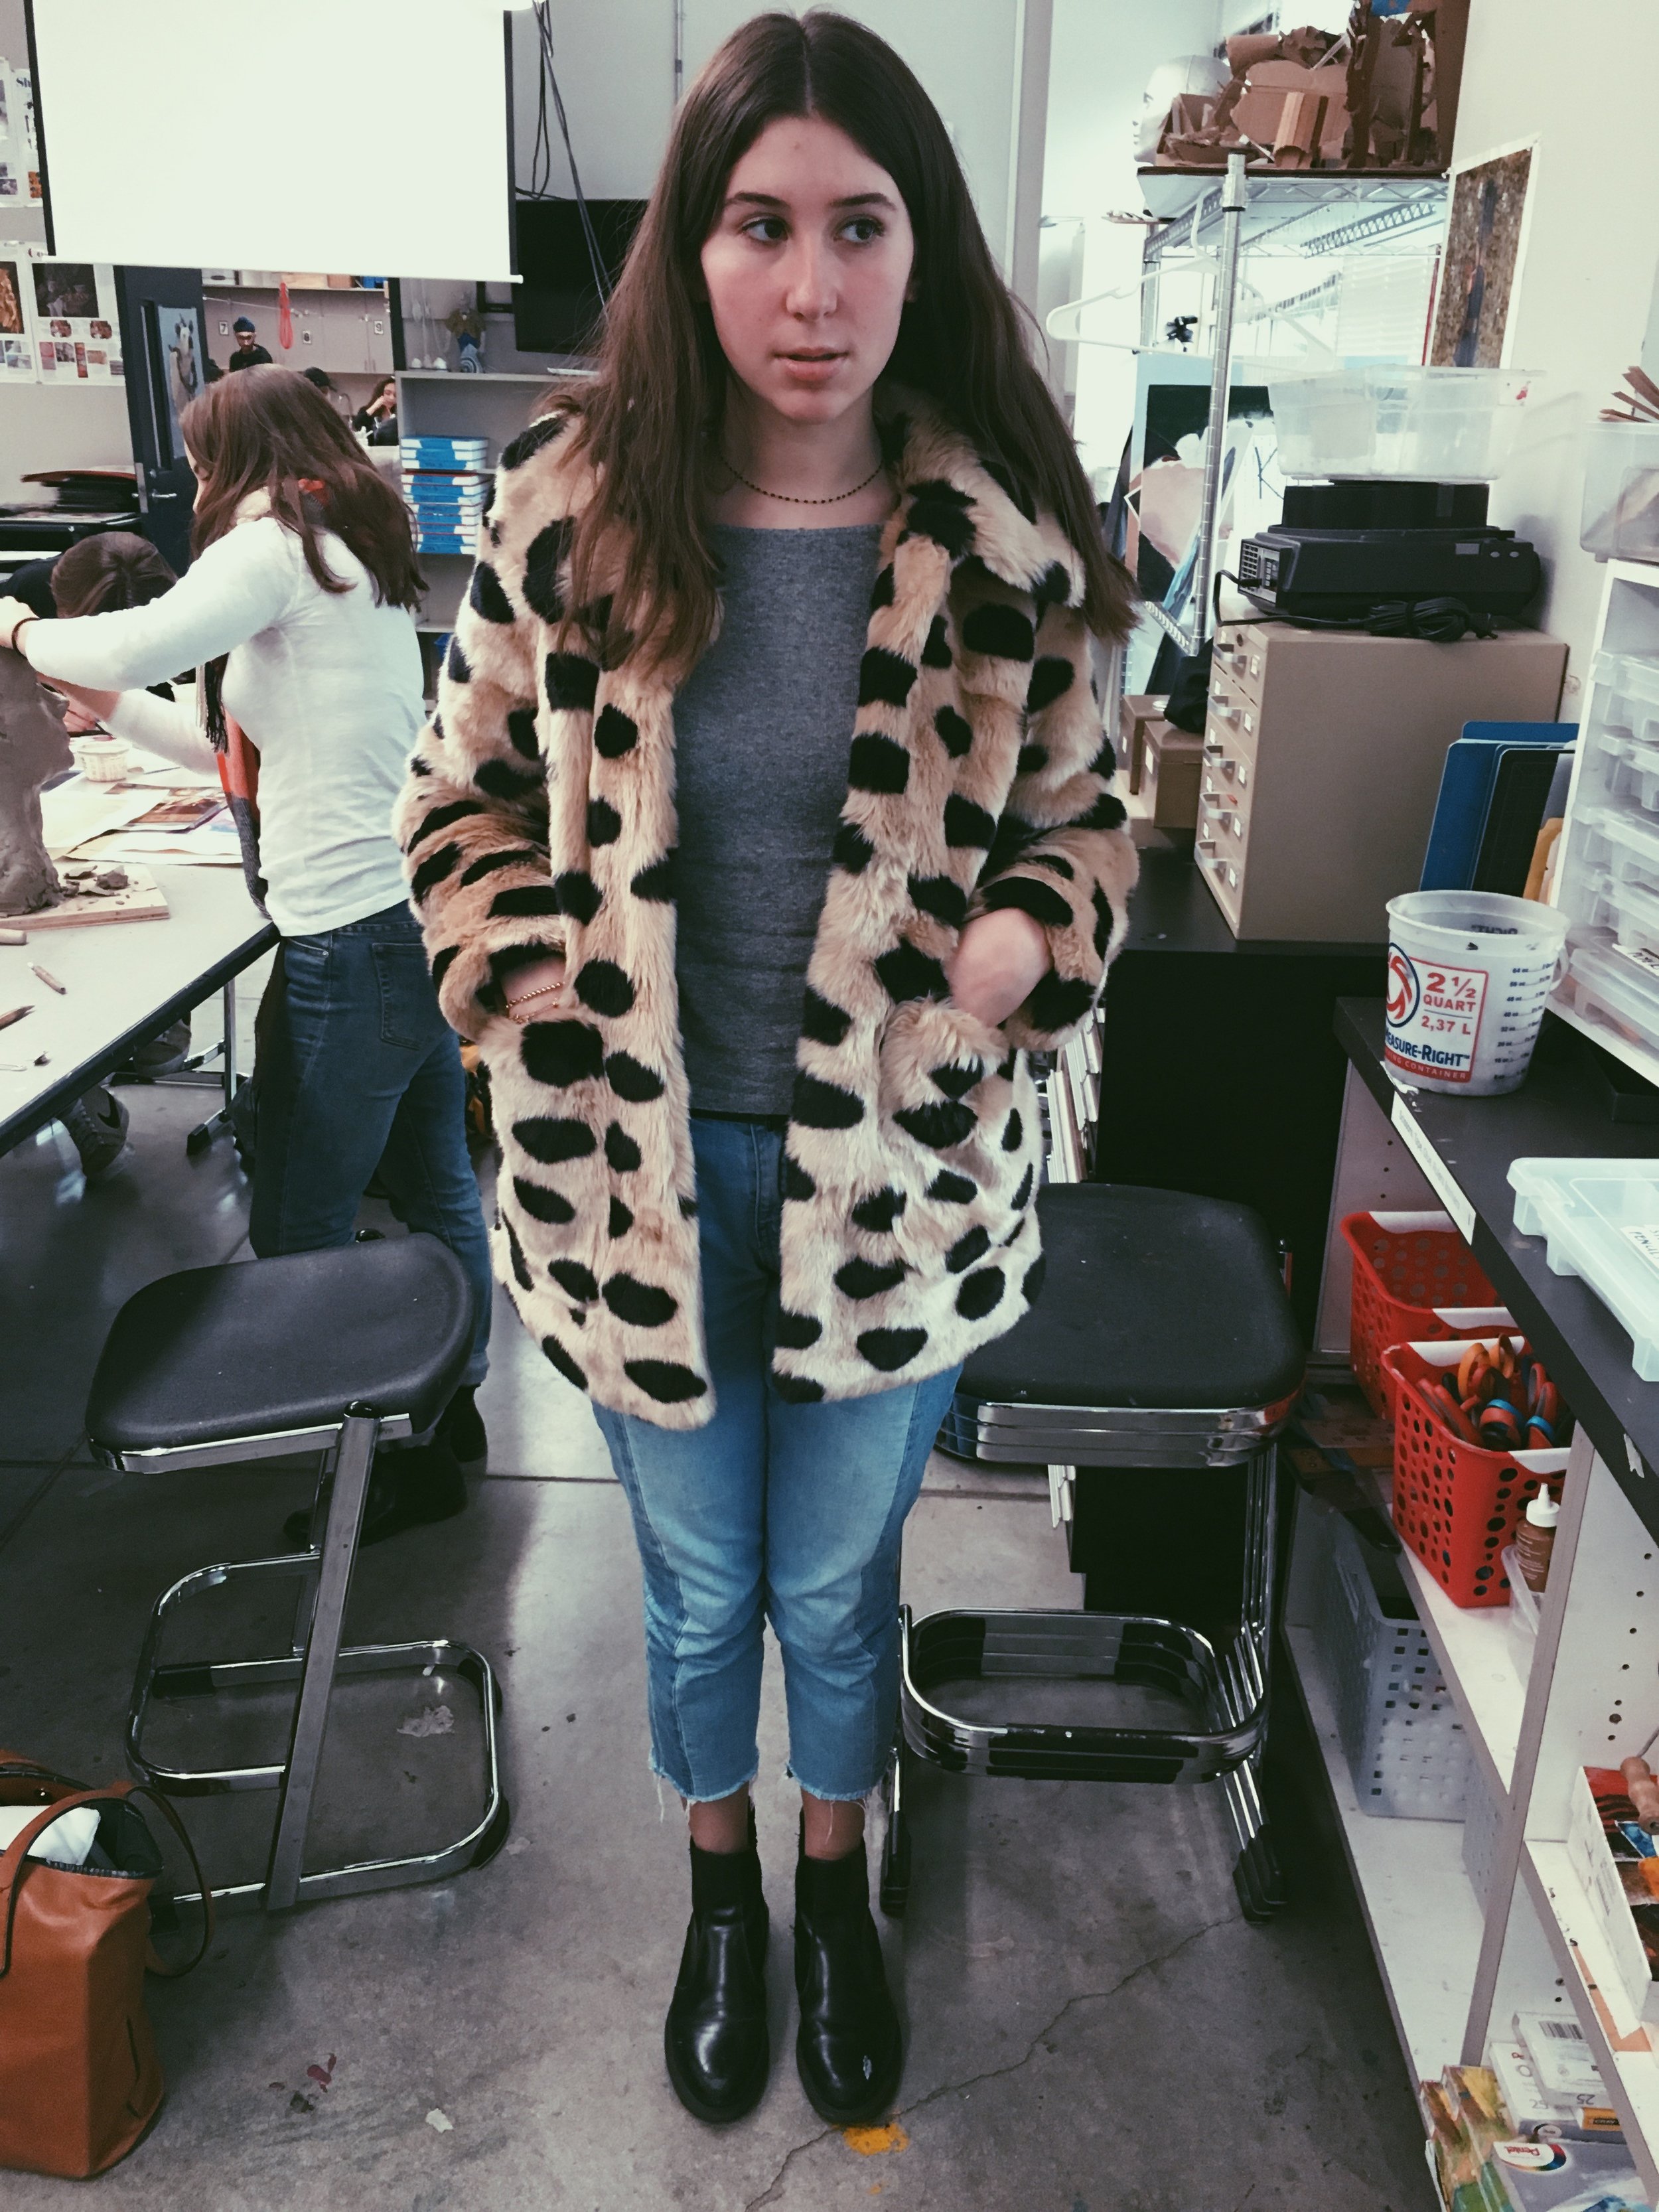    Matilde ‘17:    When you can’t wrap up in blankets, instead go for a warm faux fur coat! Matilde likes her Jakke coat, Mango jeans, Stefanel sweater, paired with Doc Marten boots.   Très chic!  